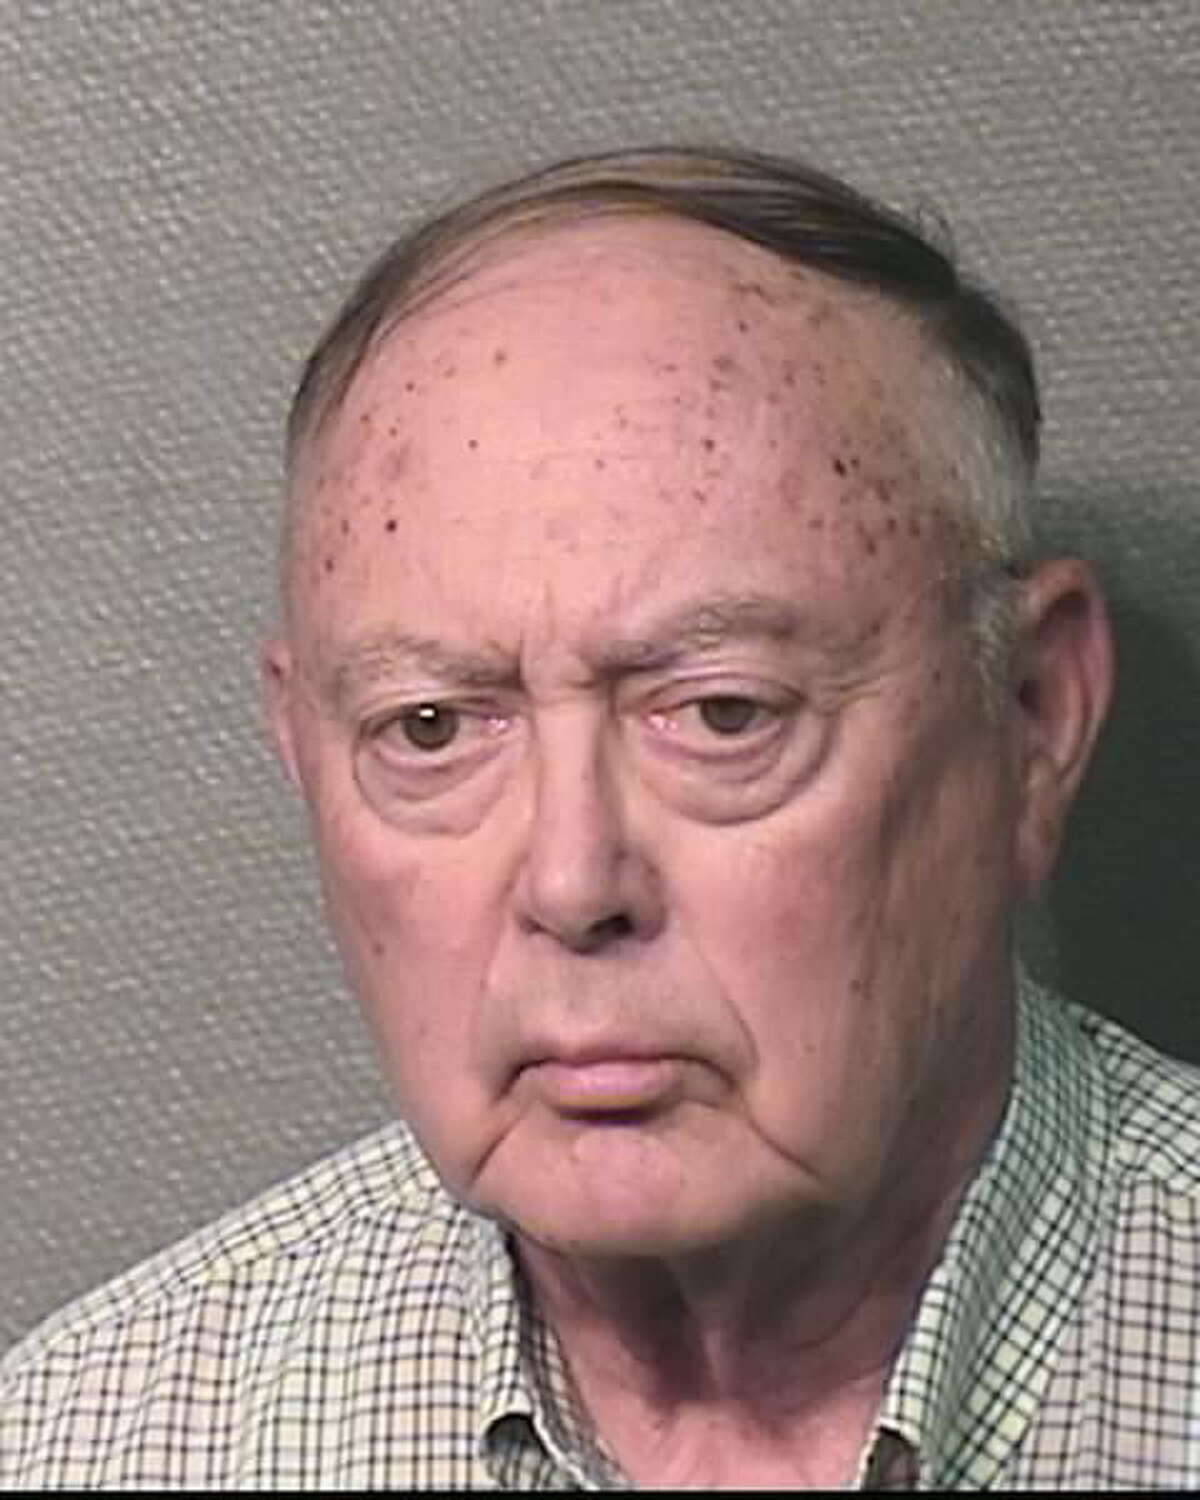 ARRESTED: Houston man connected to Lone Star, Baptist Church arrested, charged for soliciting prostitution Arnold Eledge, a former secretary at Helmers Street Baptist Church and a current professor at Lone Star College-North Harris was arrested as part of a two-month-long prostitution sting. >> Others caught in the prostitution sting. 